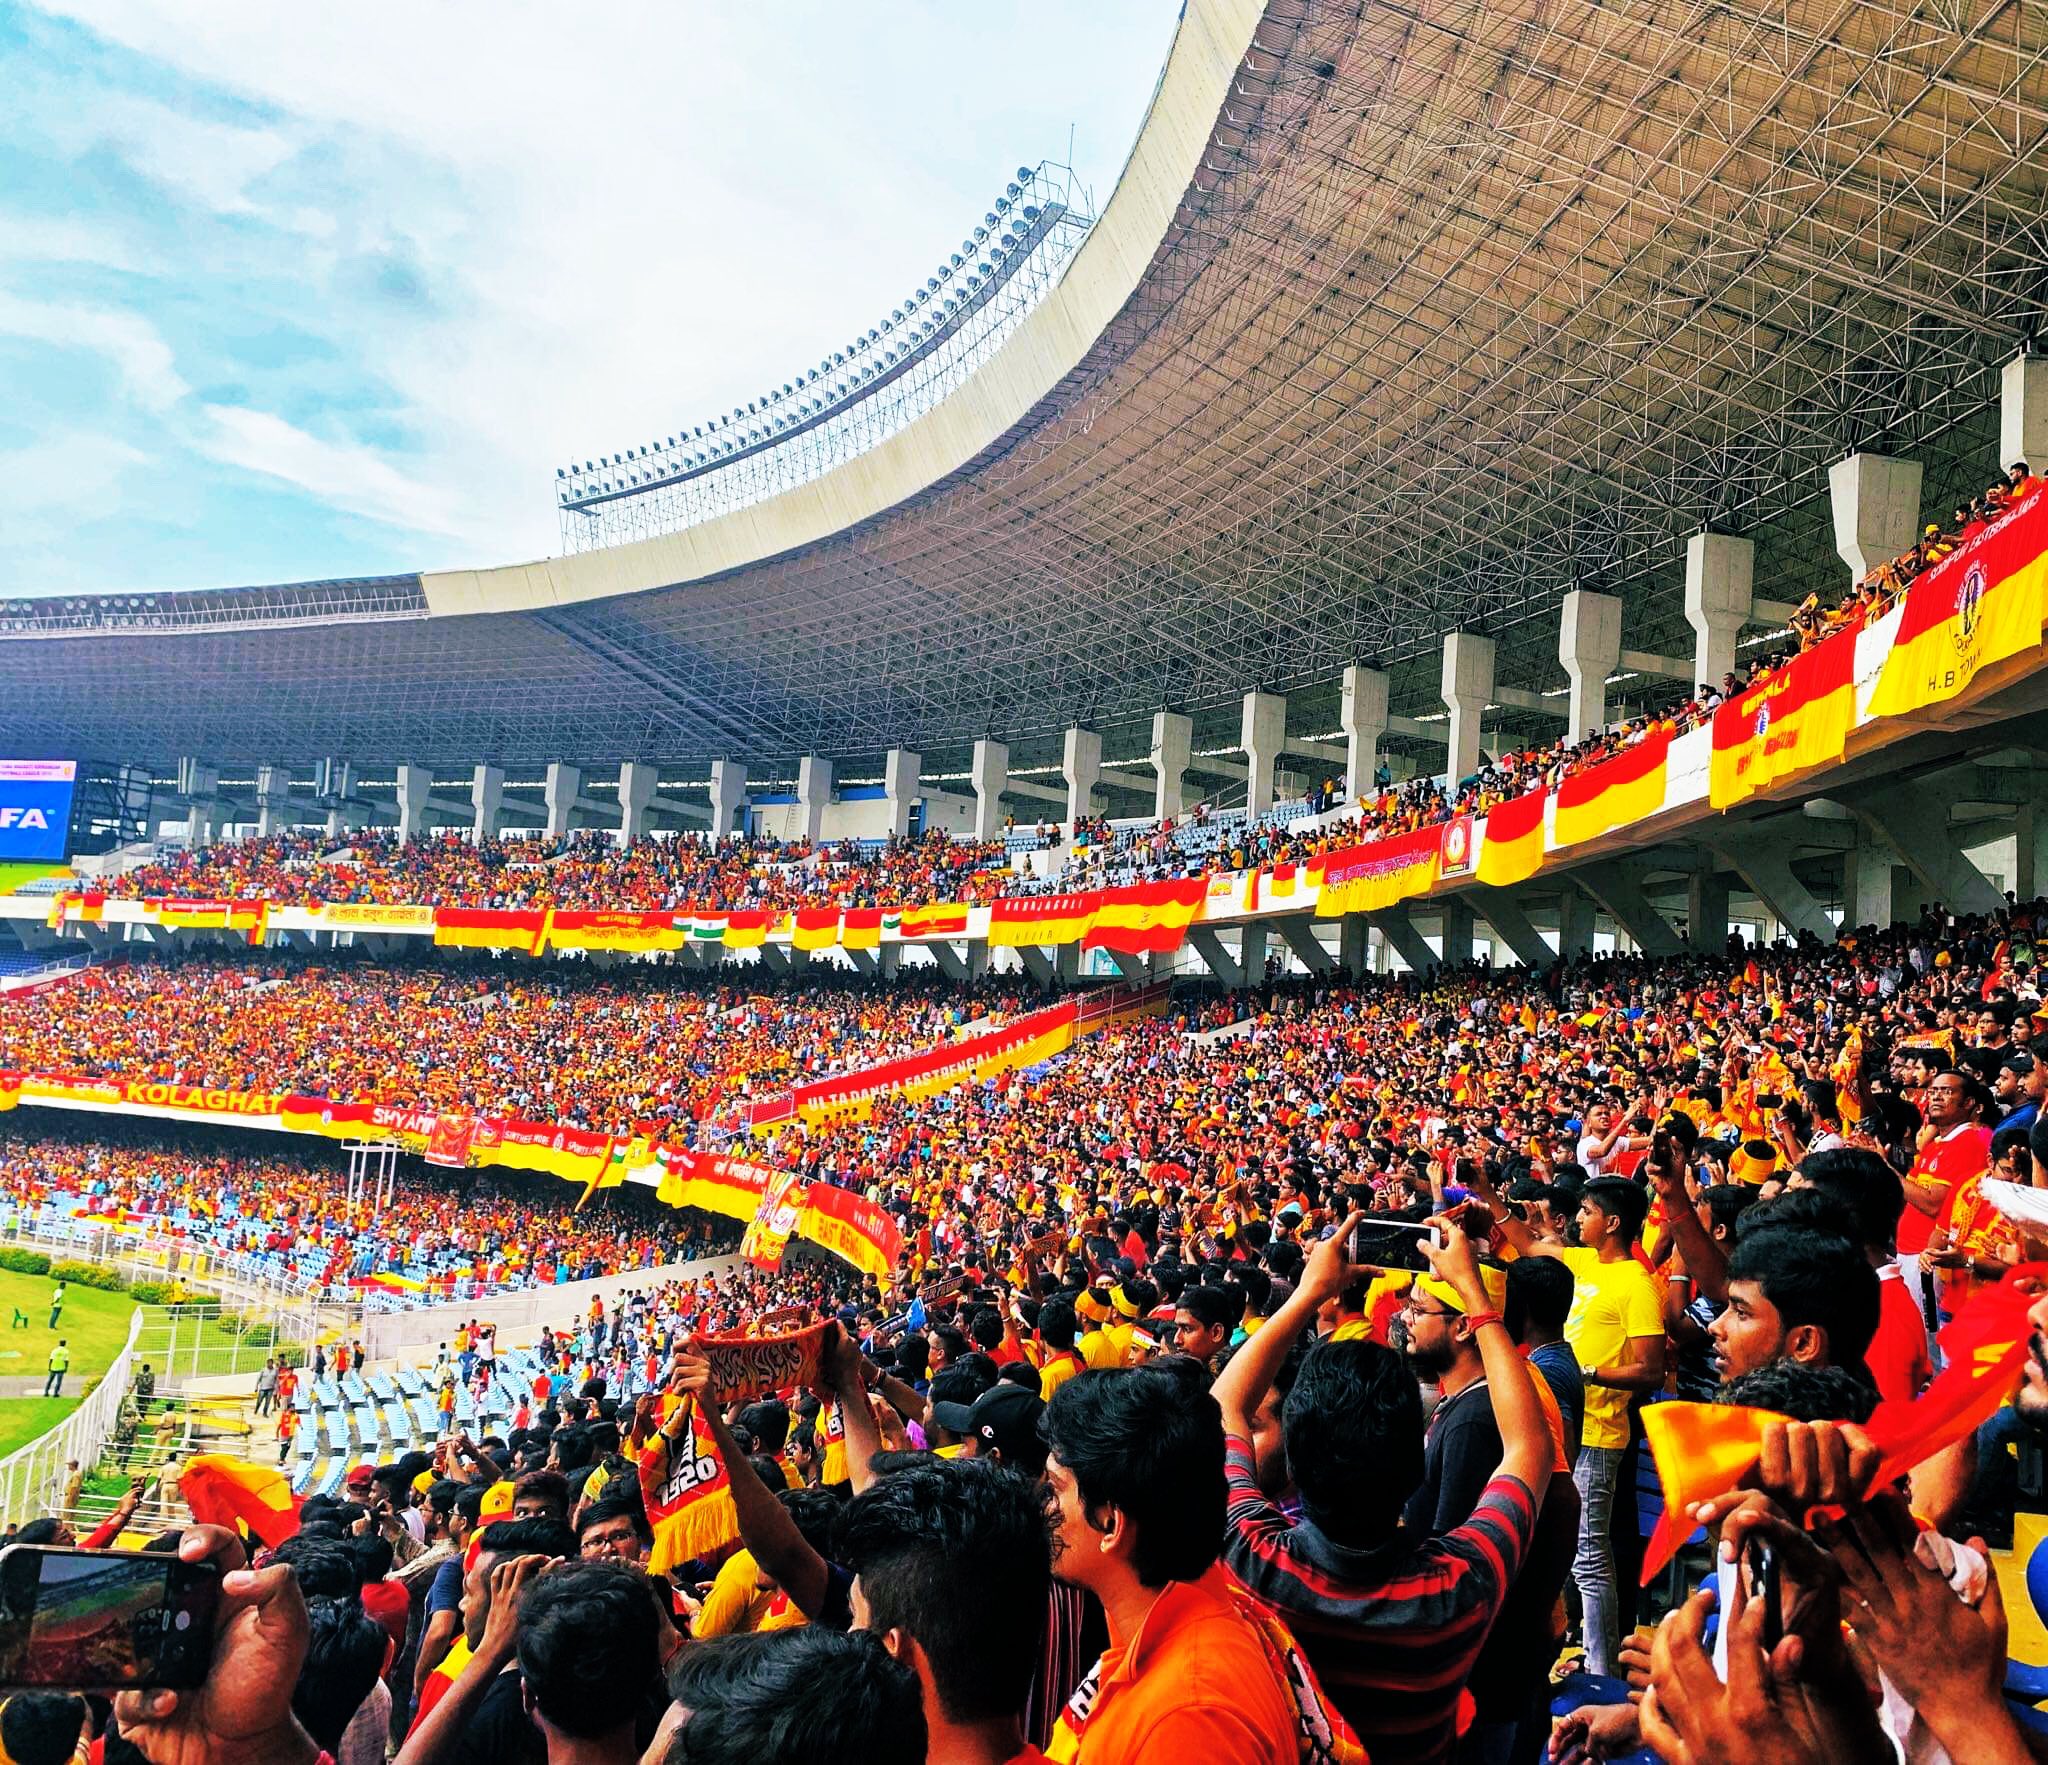 EAST BENGAL the REAL POWER (EBRP)❤💛 on X: Respected CM, The